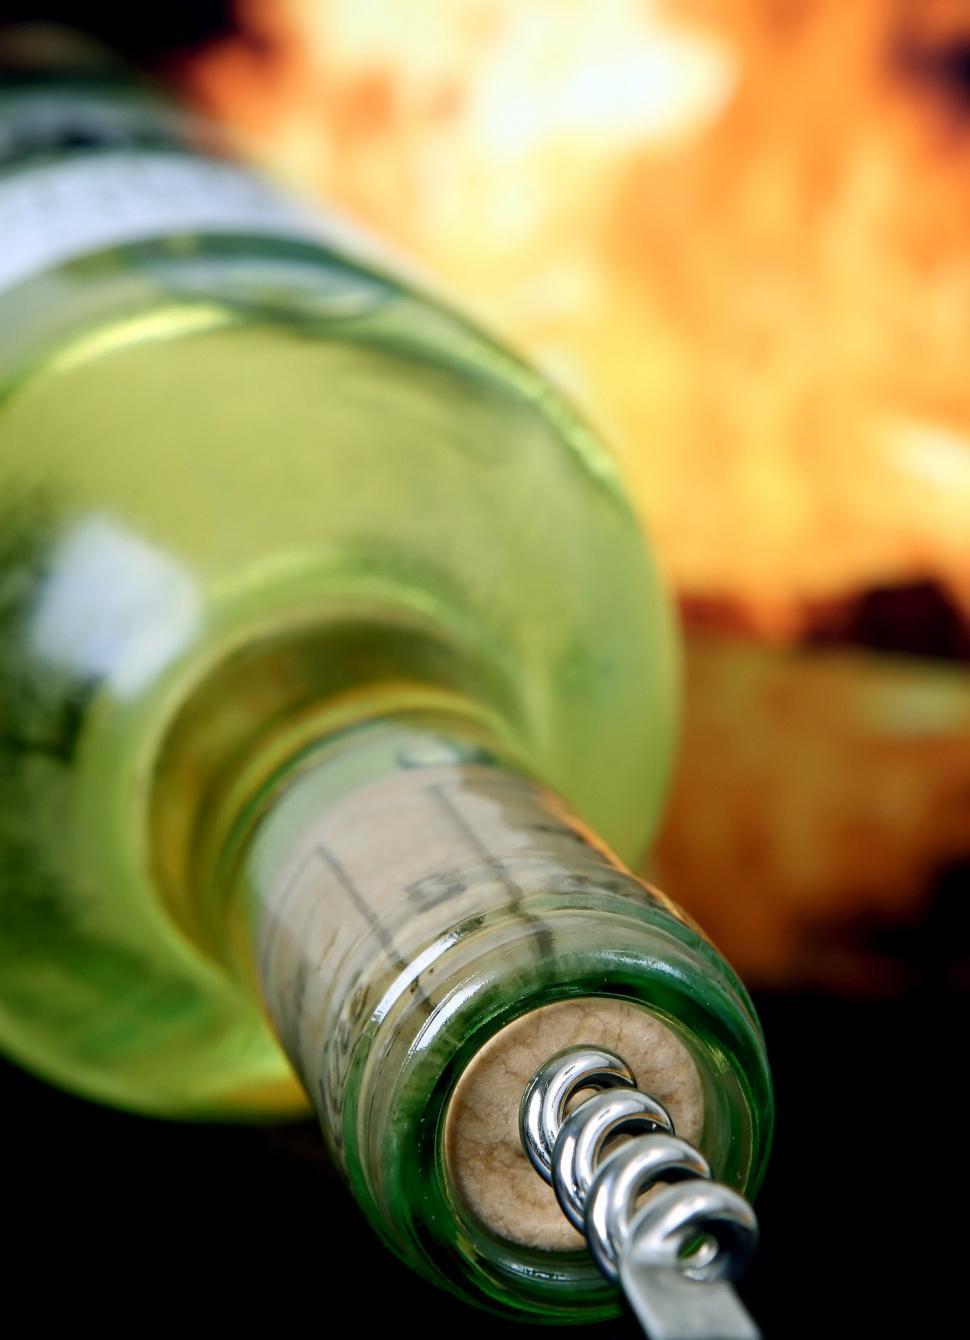 Free Image of Close Up of a Wine Bottle With a Cork 